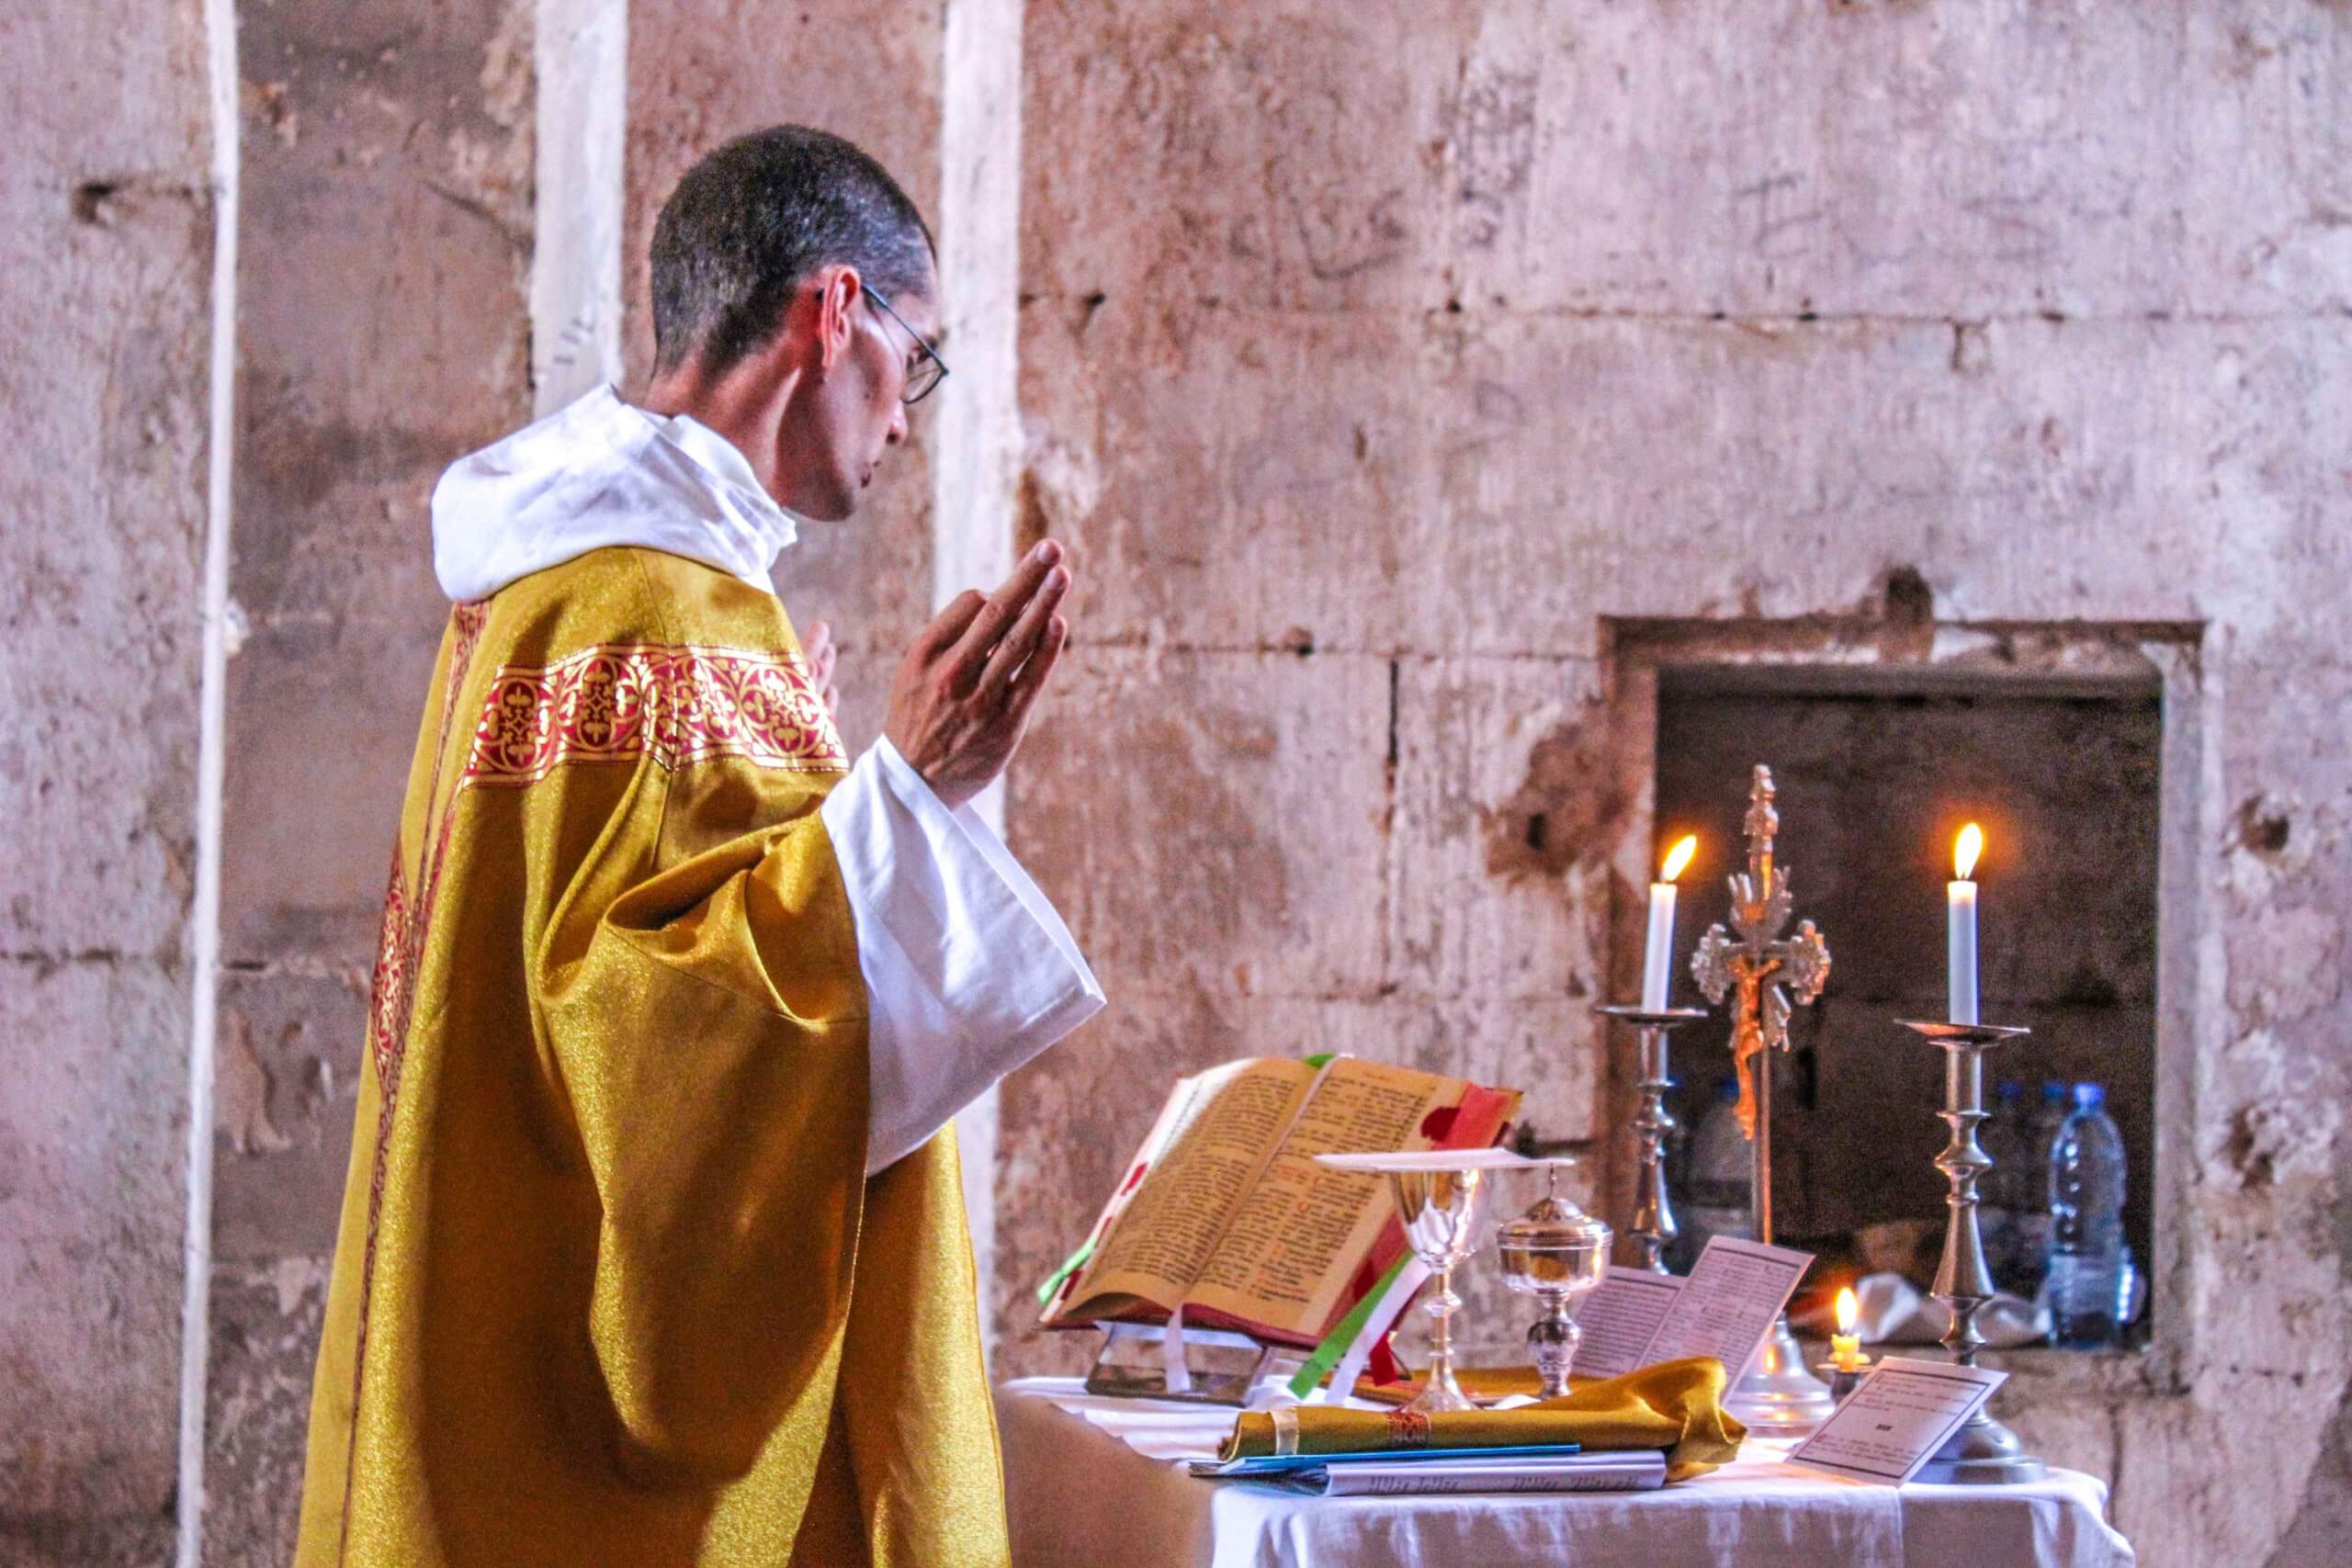 First mass celebrated in the Krak des Chevaliers chapel in 745 years